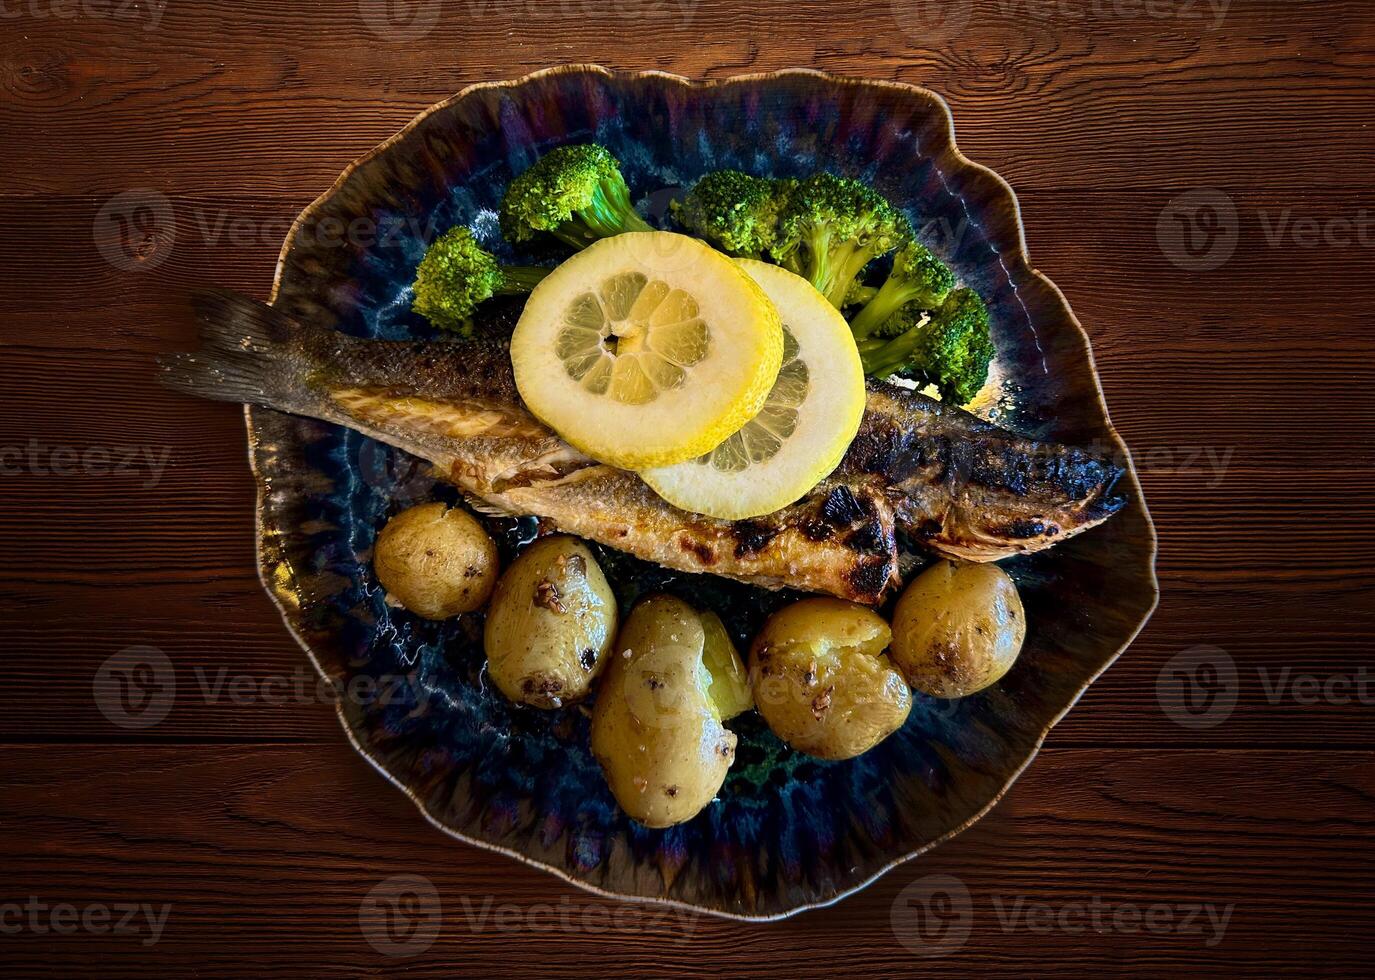 Golden roasted fish with potatoes, lemon and broccoli, served on wooden table. Overhead, horizontal - image photo